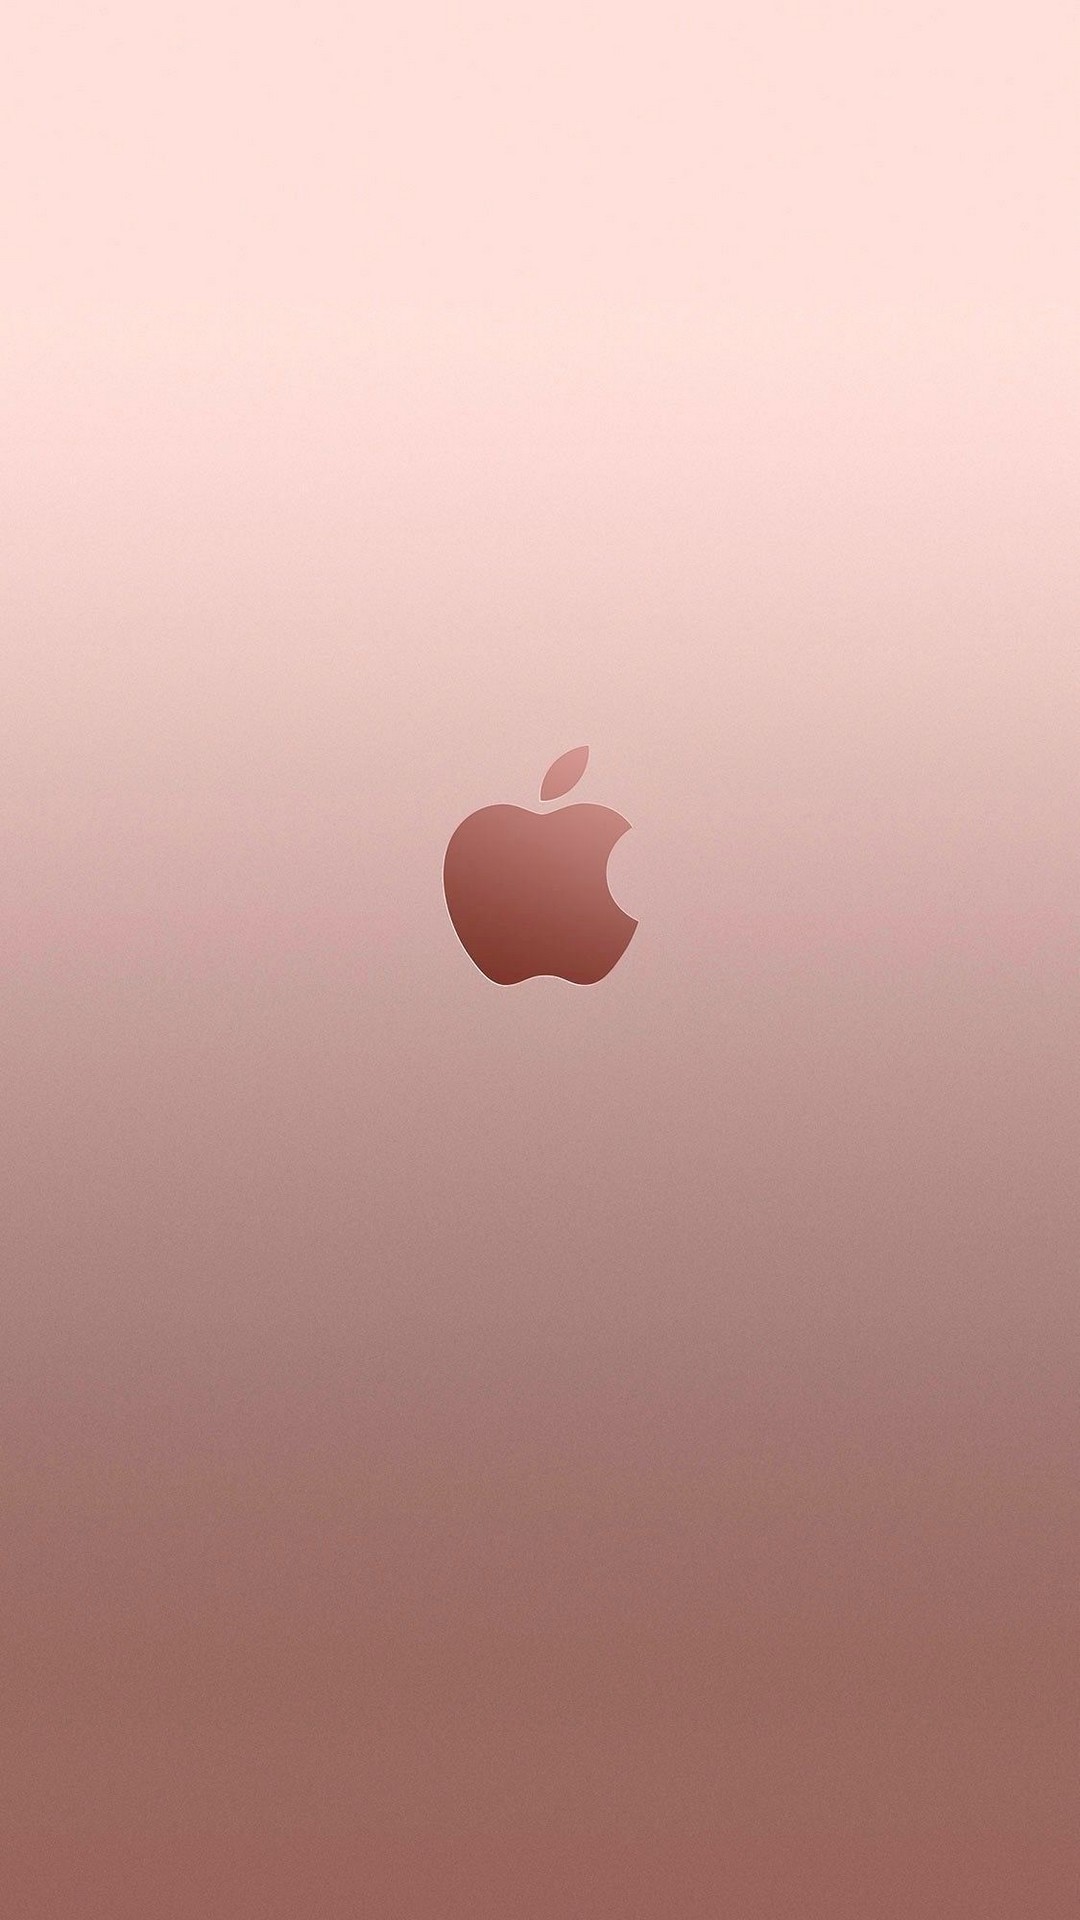 Rose Gold Aesthetic Wallpaper iPhone with high-resolution 1080x1920 pixel. You can use and set as wallpaper for Notebook Screensavers, Mac Wallpapers, Mobile Home Screen, iPhone or Android Phones Lock Screen